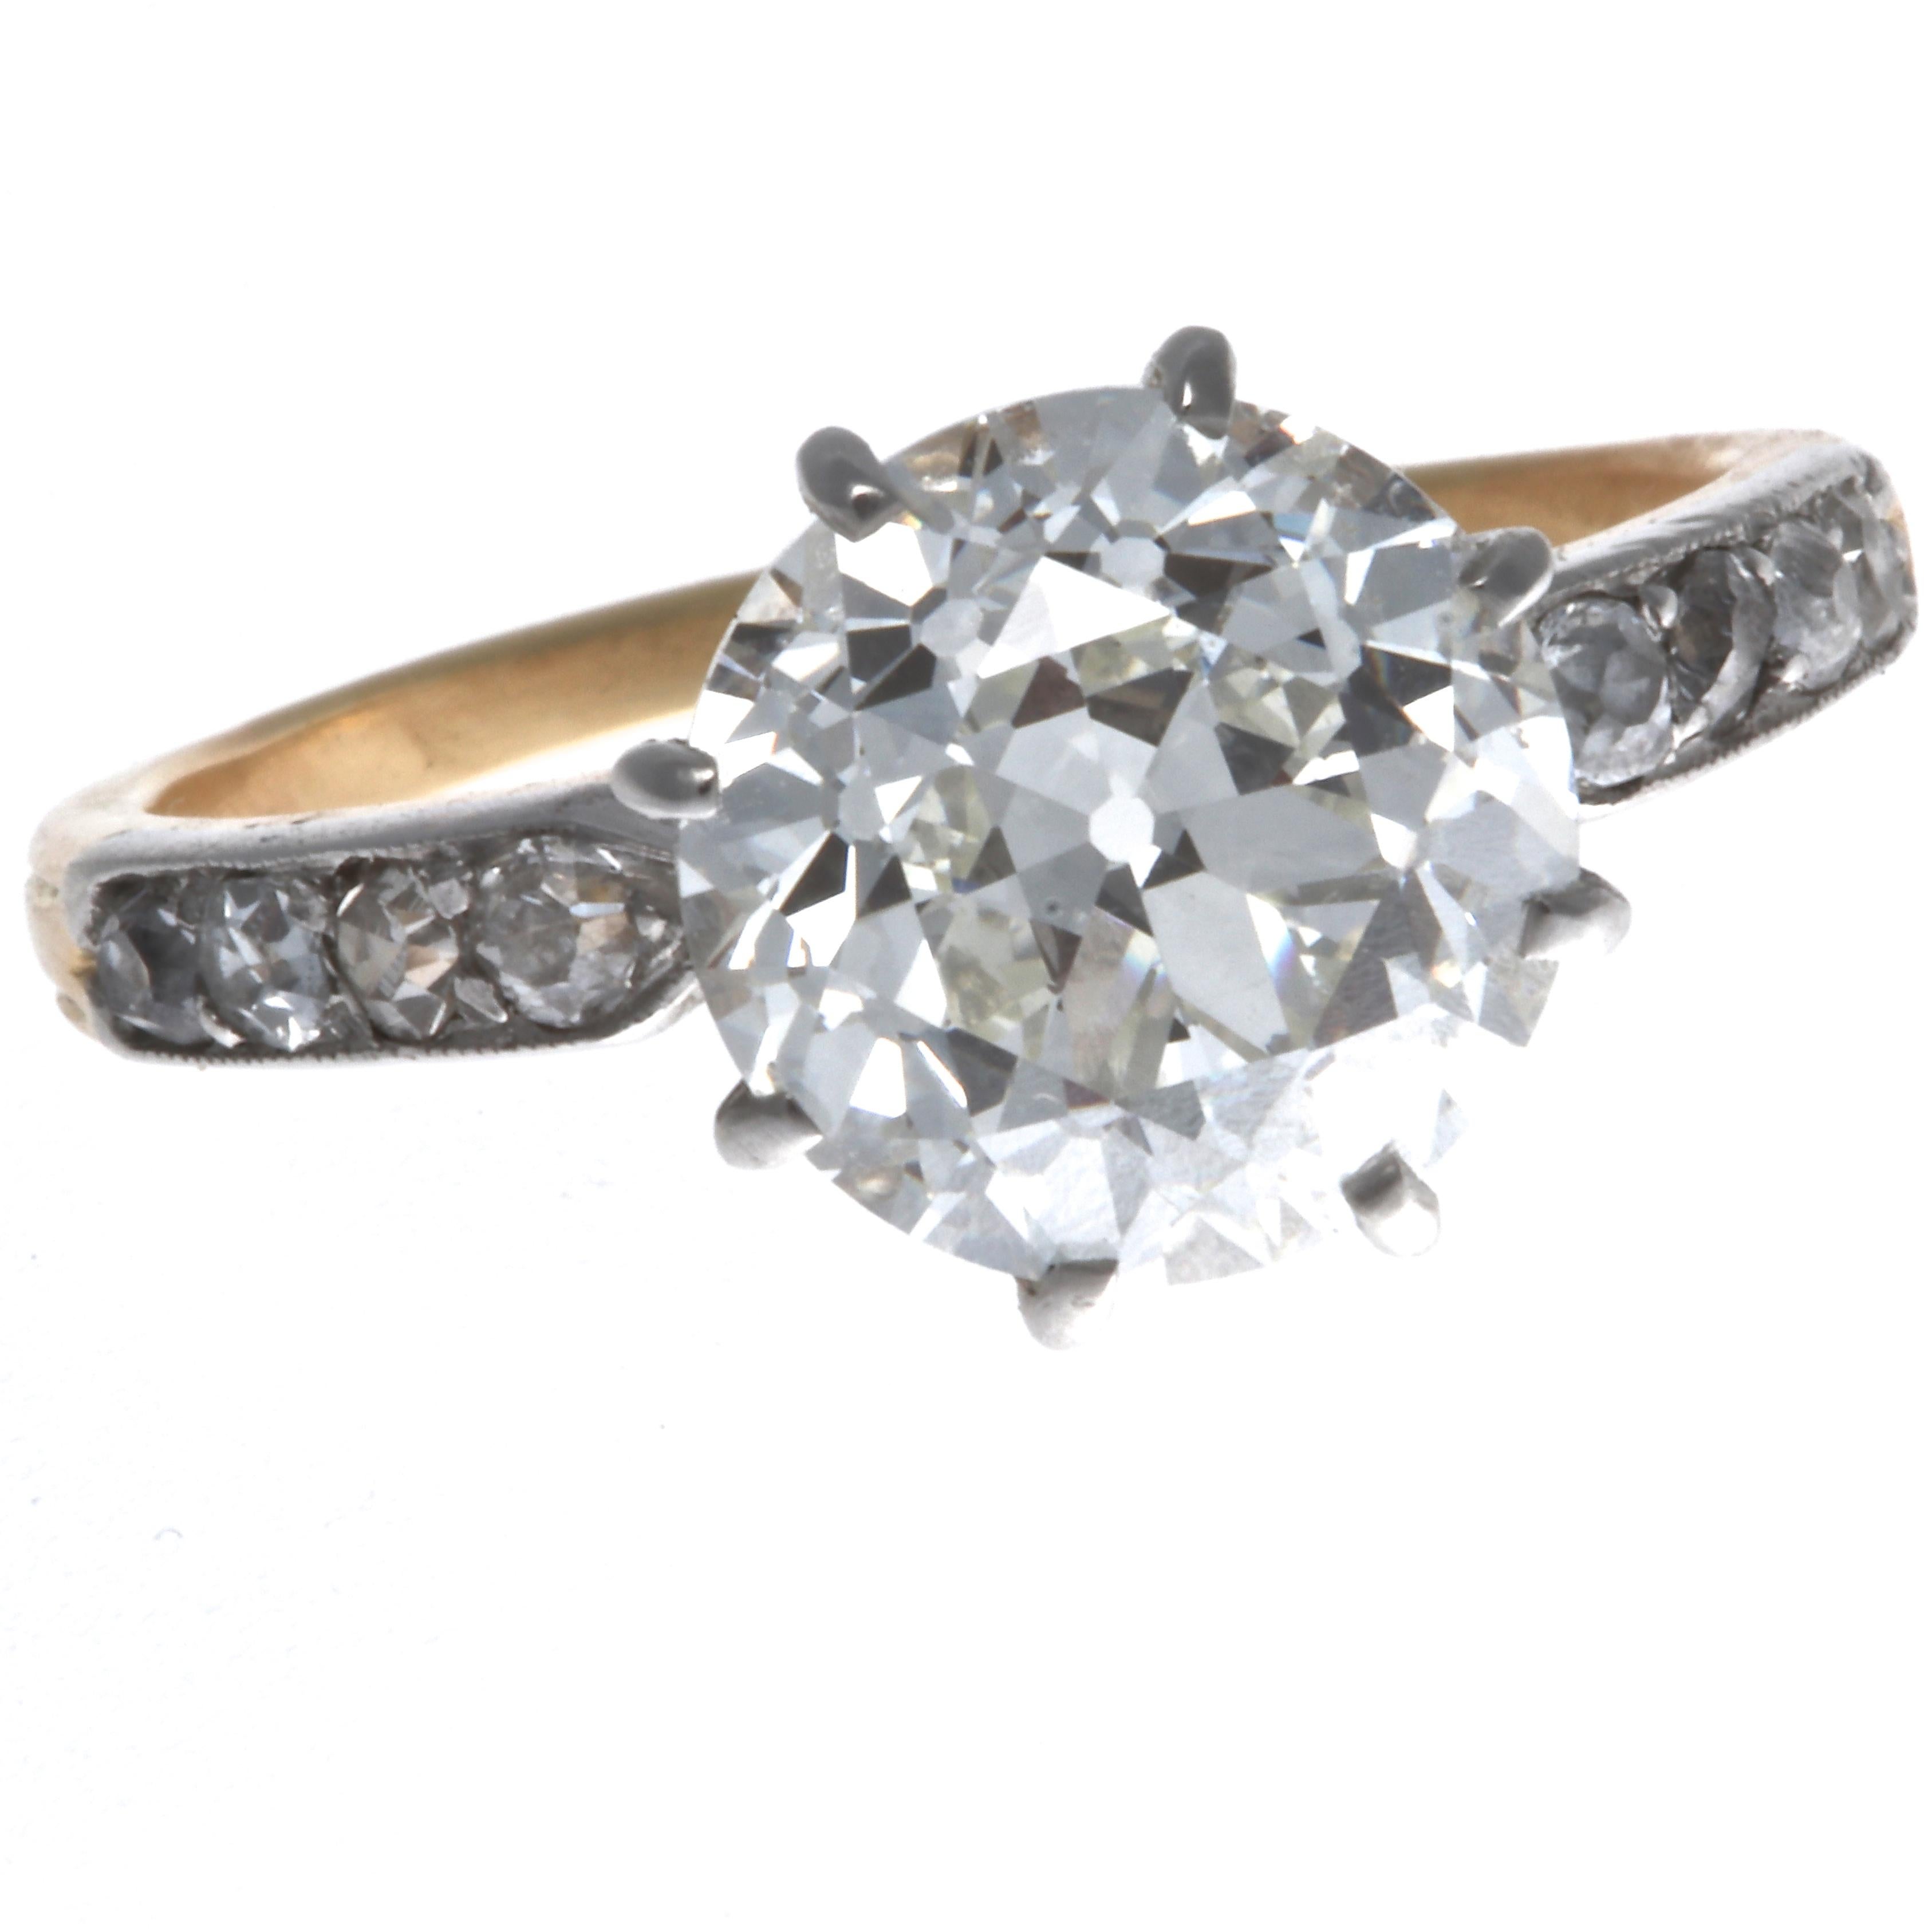 This stunning Art Deco diamond engagement ring features a GIA certified 3.23  carat, J color, VVS2 clarity round cut diamond. Held in place by 8 prongs, this shimmering center stone is adorned with 7 old European cut and 1 single cut diamond, that